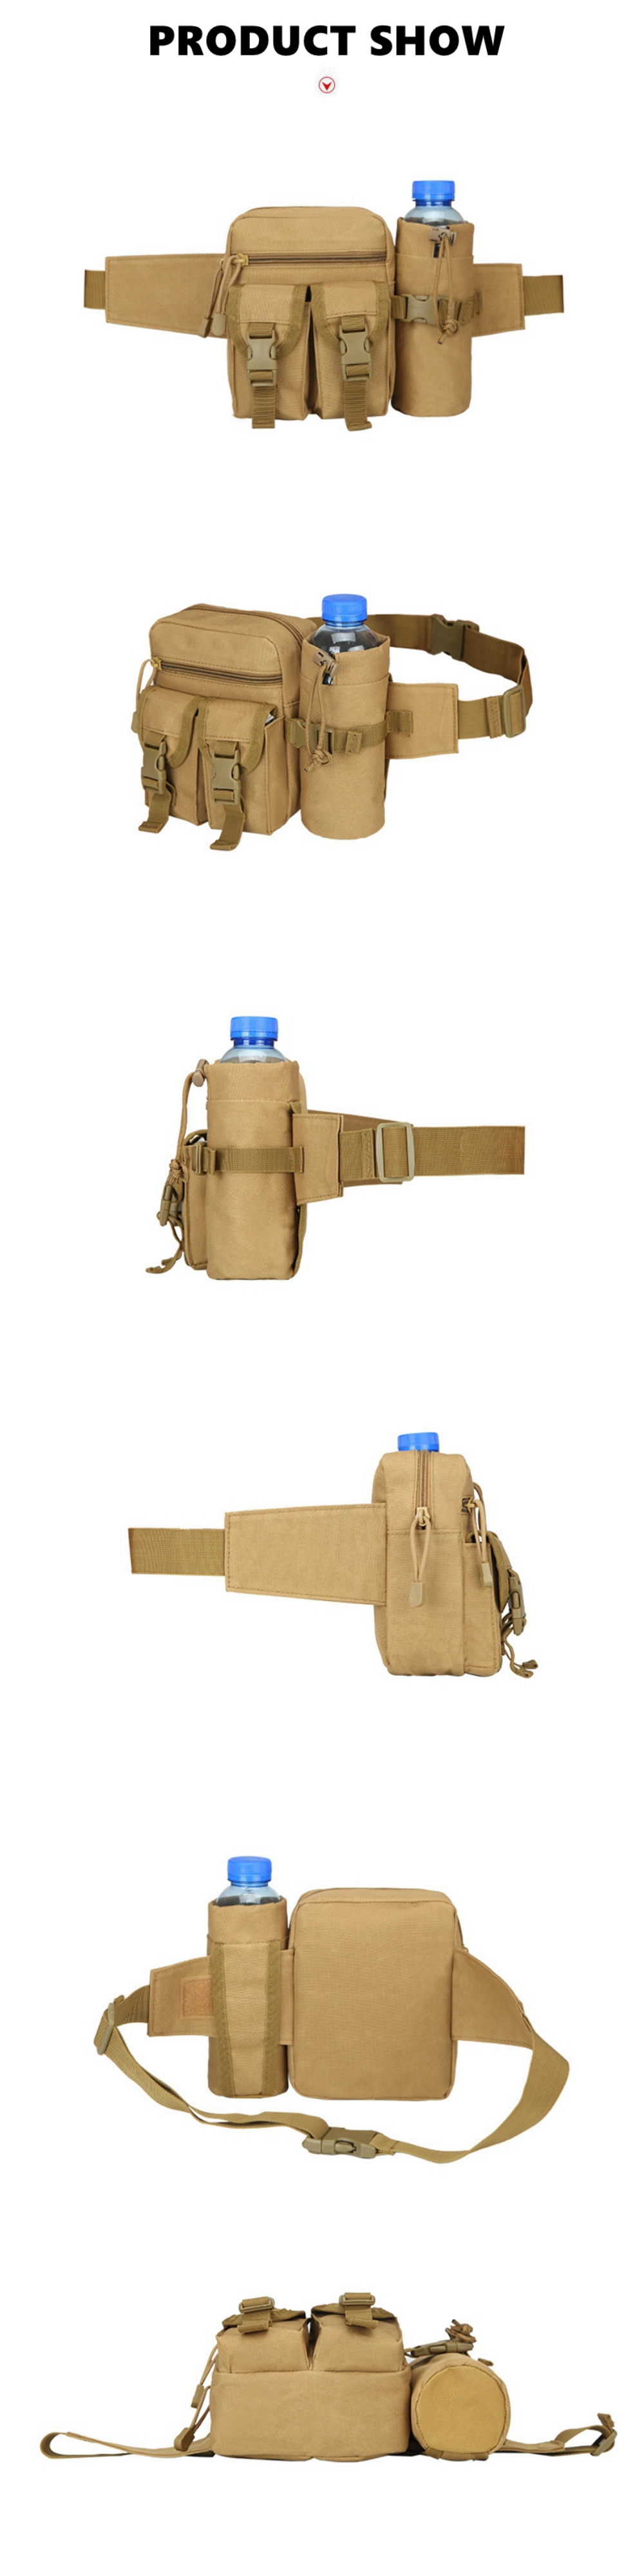 Fishing-Multifunctional-Waist-Bag-Tactical-Men-Waist-Pack-Nylon-Hiking-Water-Bottle-Phone-Pouch-Outd-1840370-3